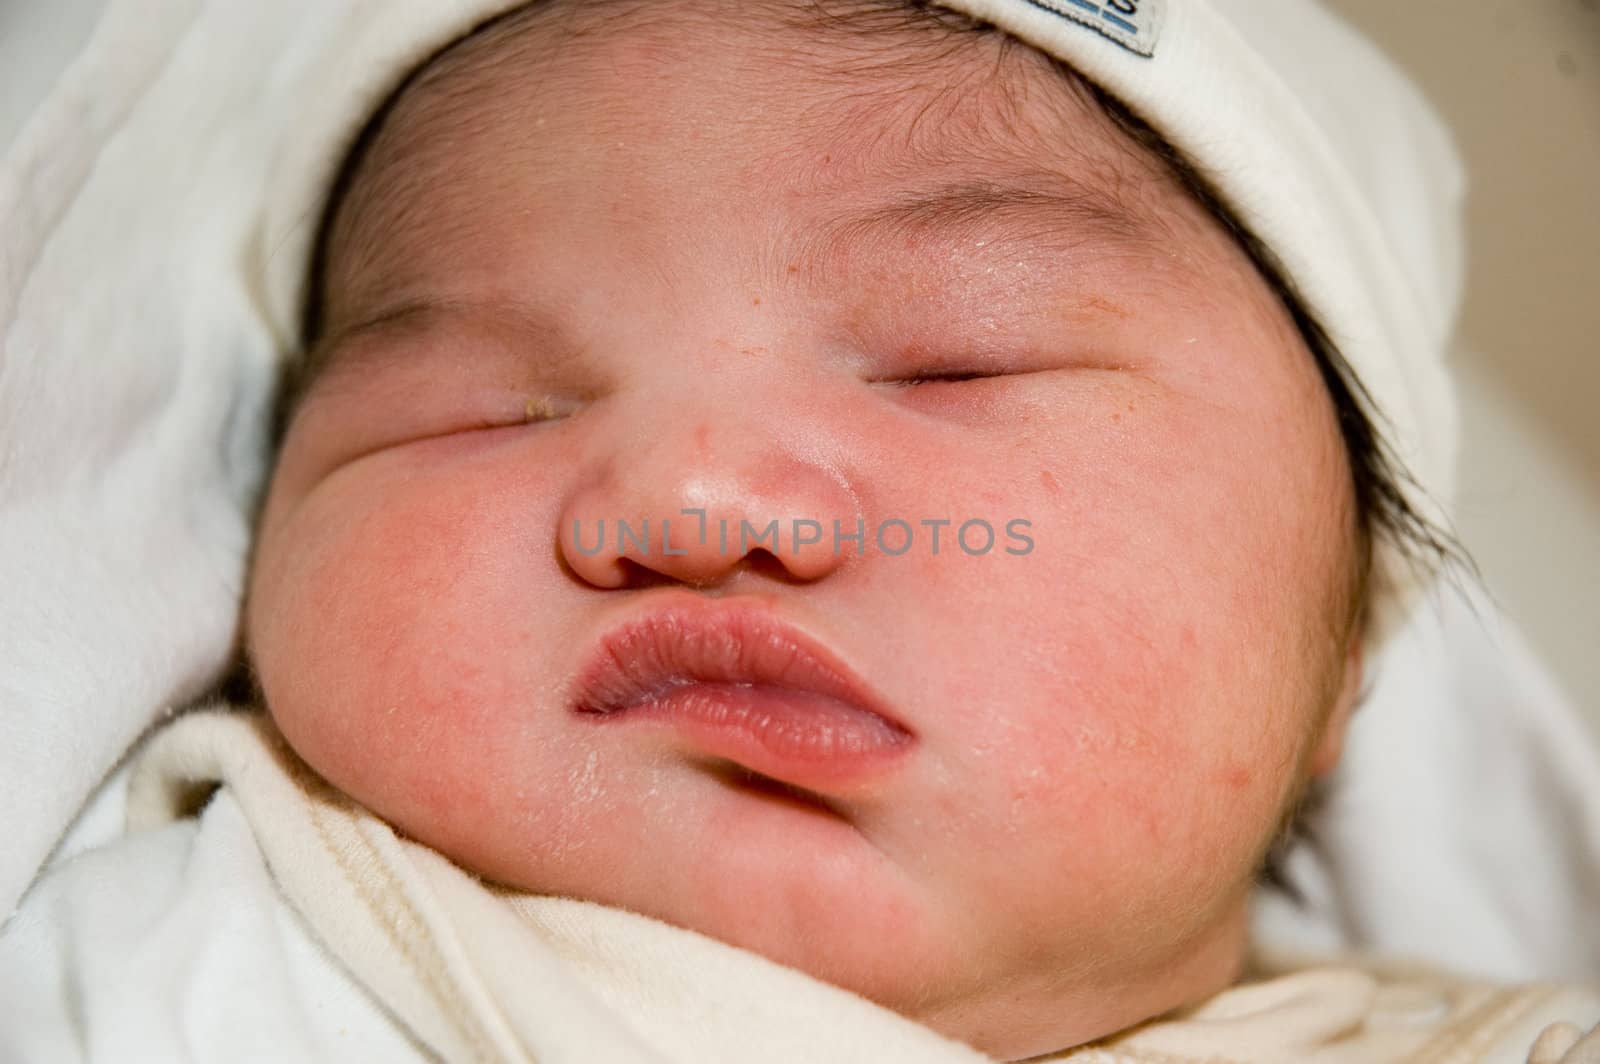  Picture of a new born face